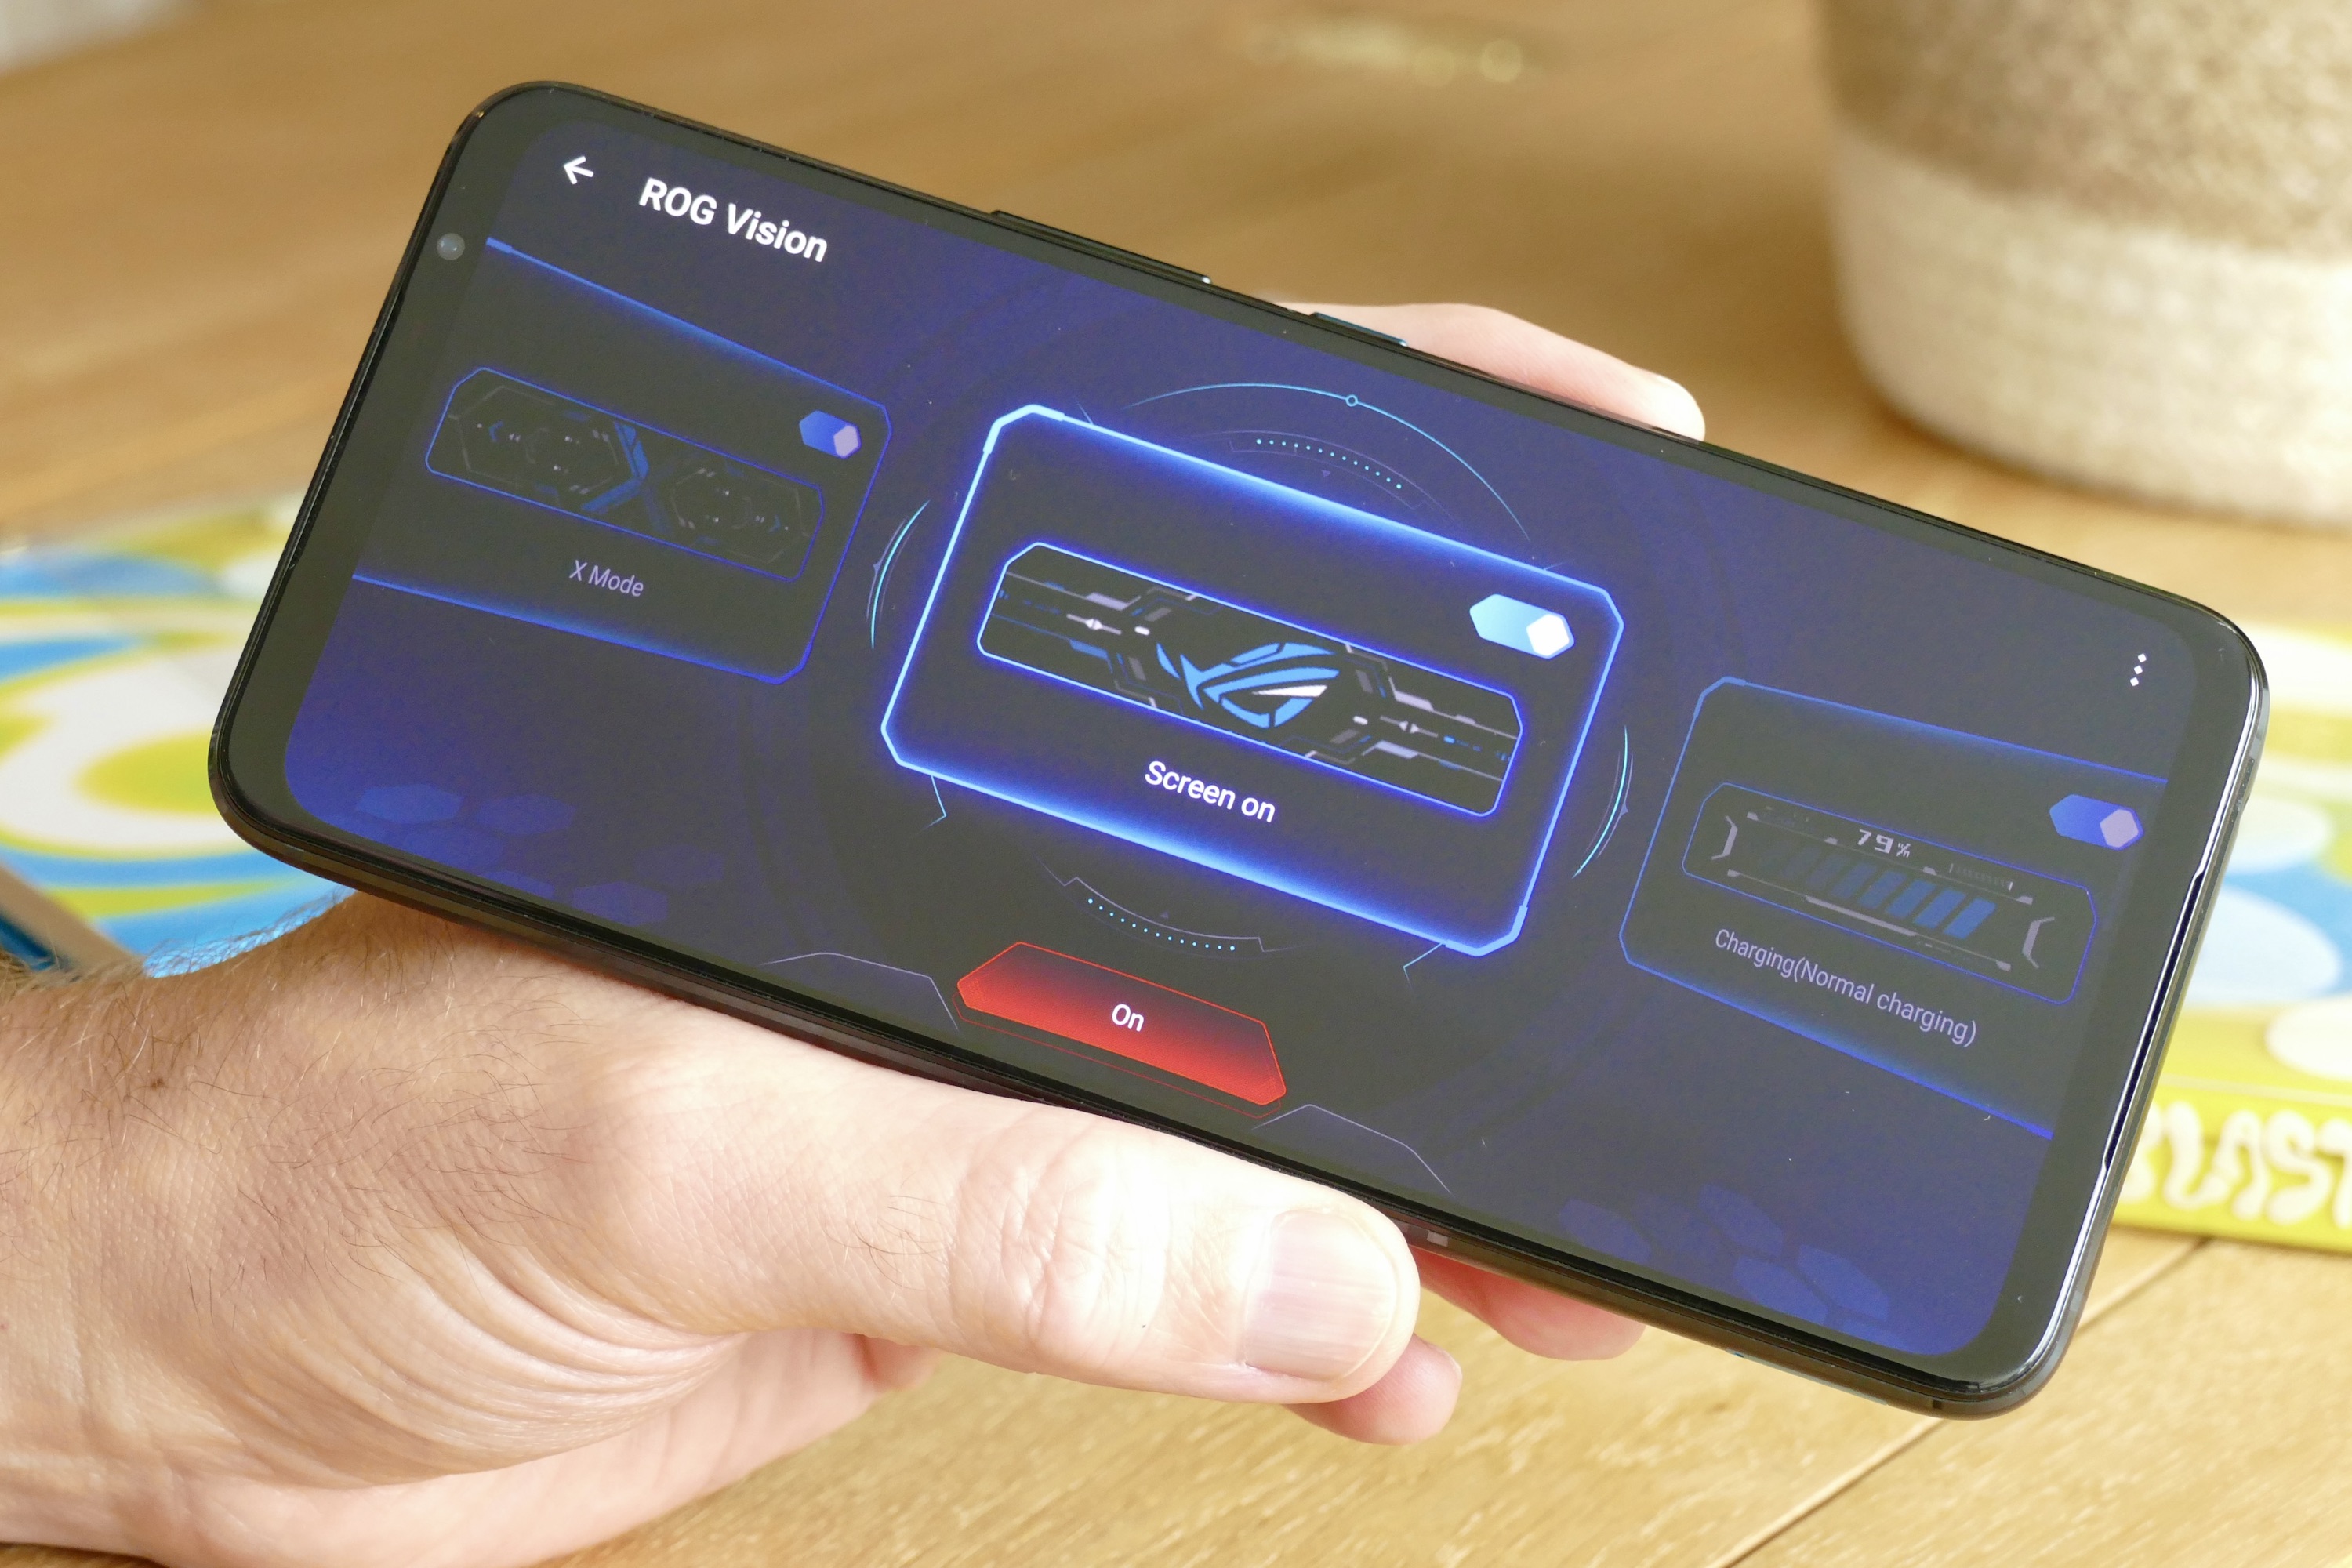 ROG Vision screen settings on the Asus ROG Phone 6 Pro.